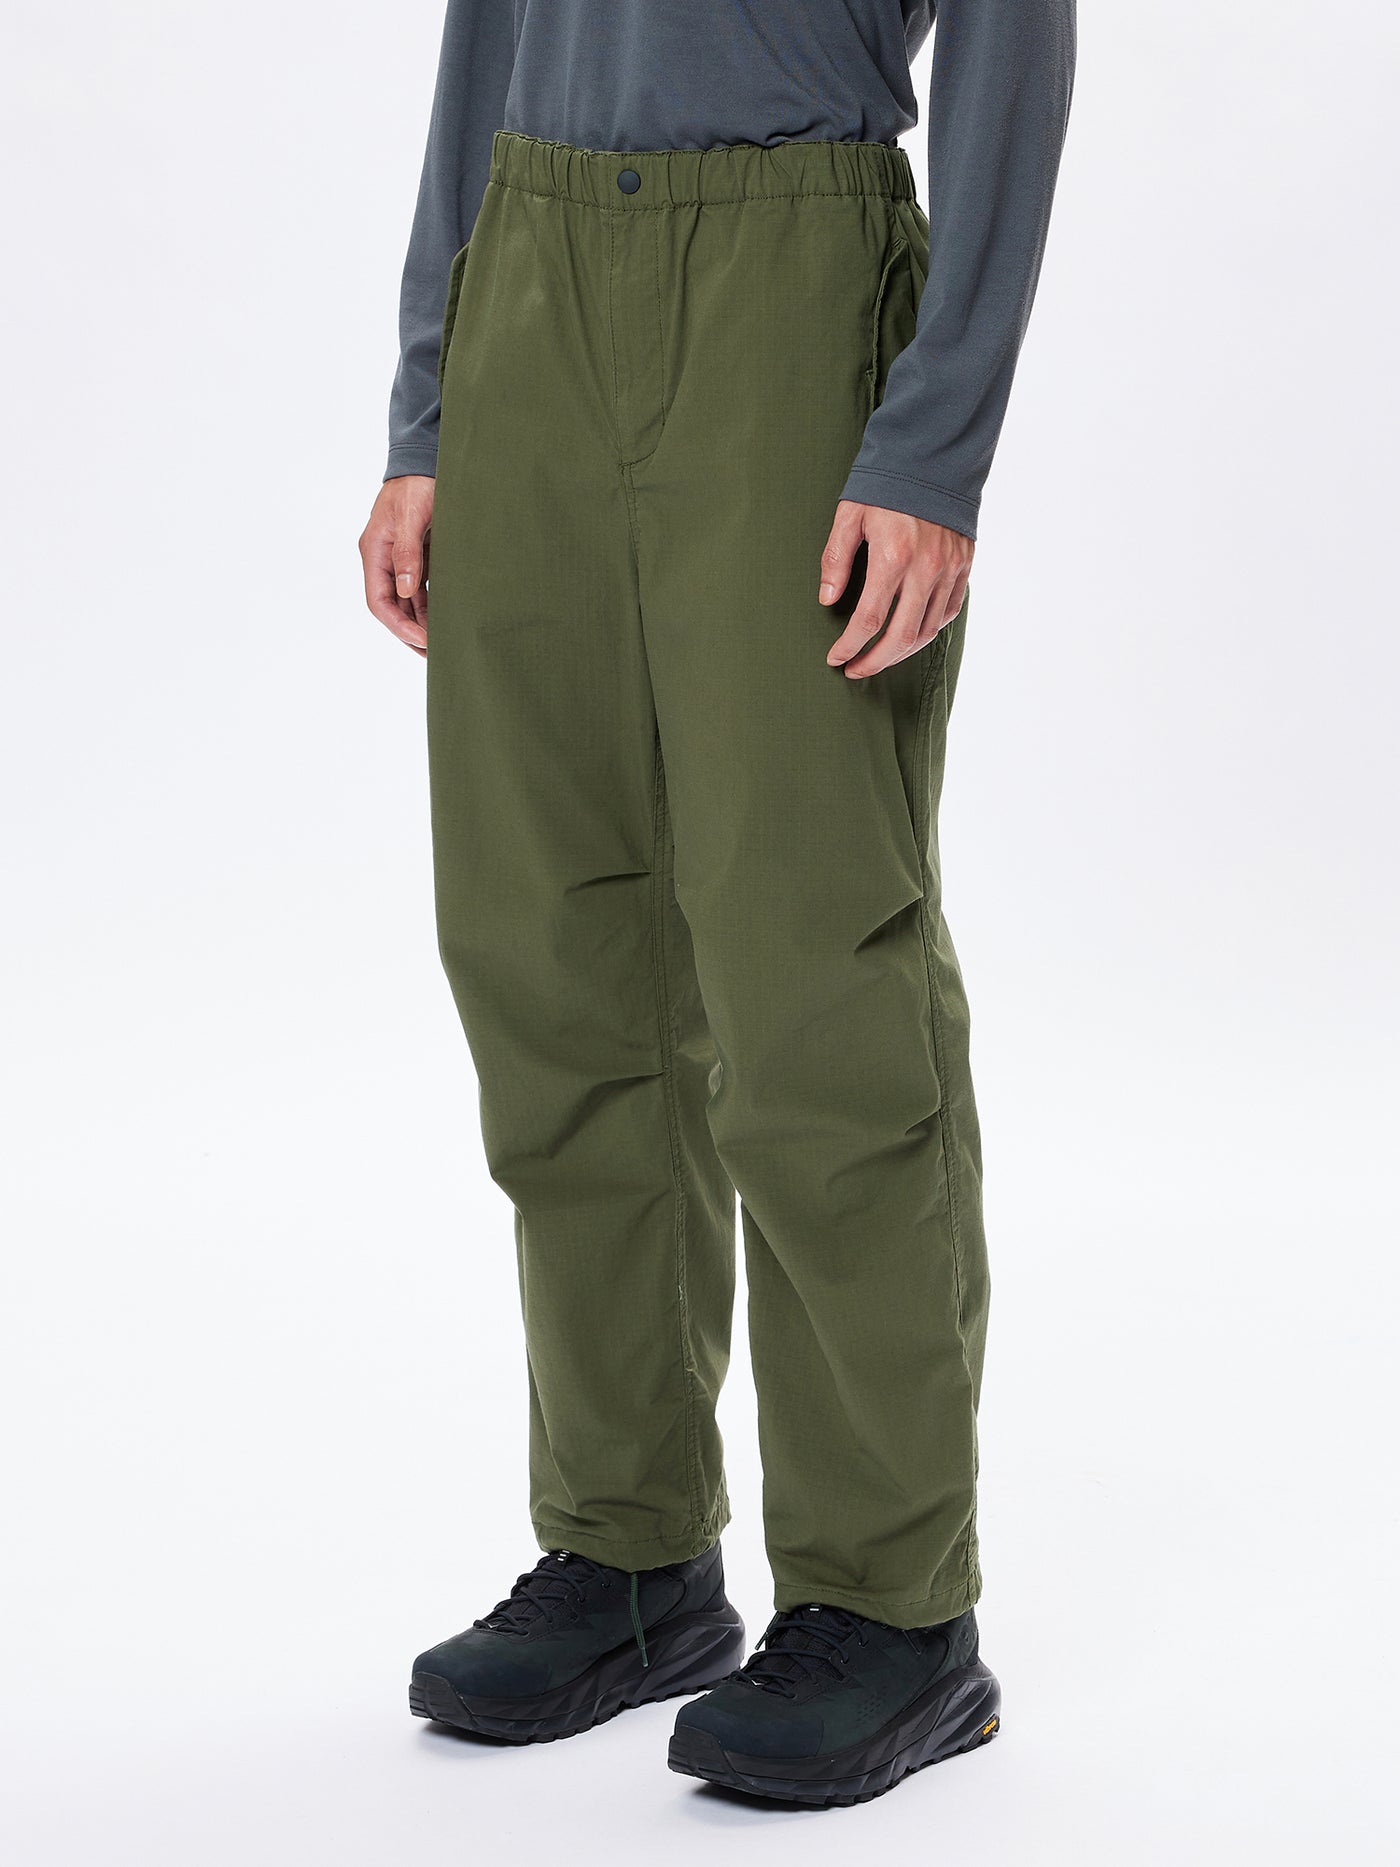 Model: Height 186cm | Wearing: OLIVE DRAB / 3